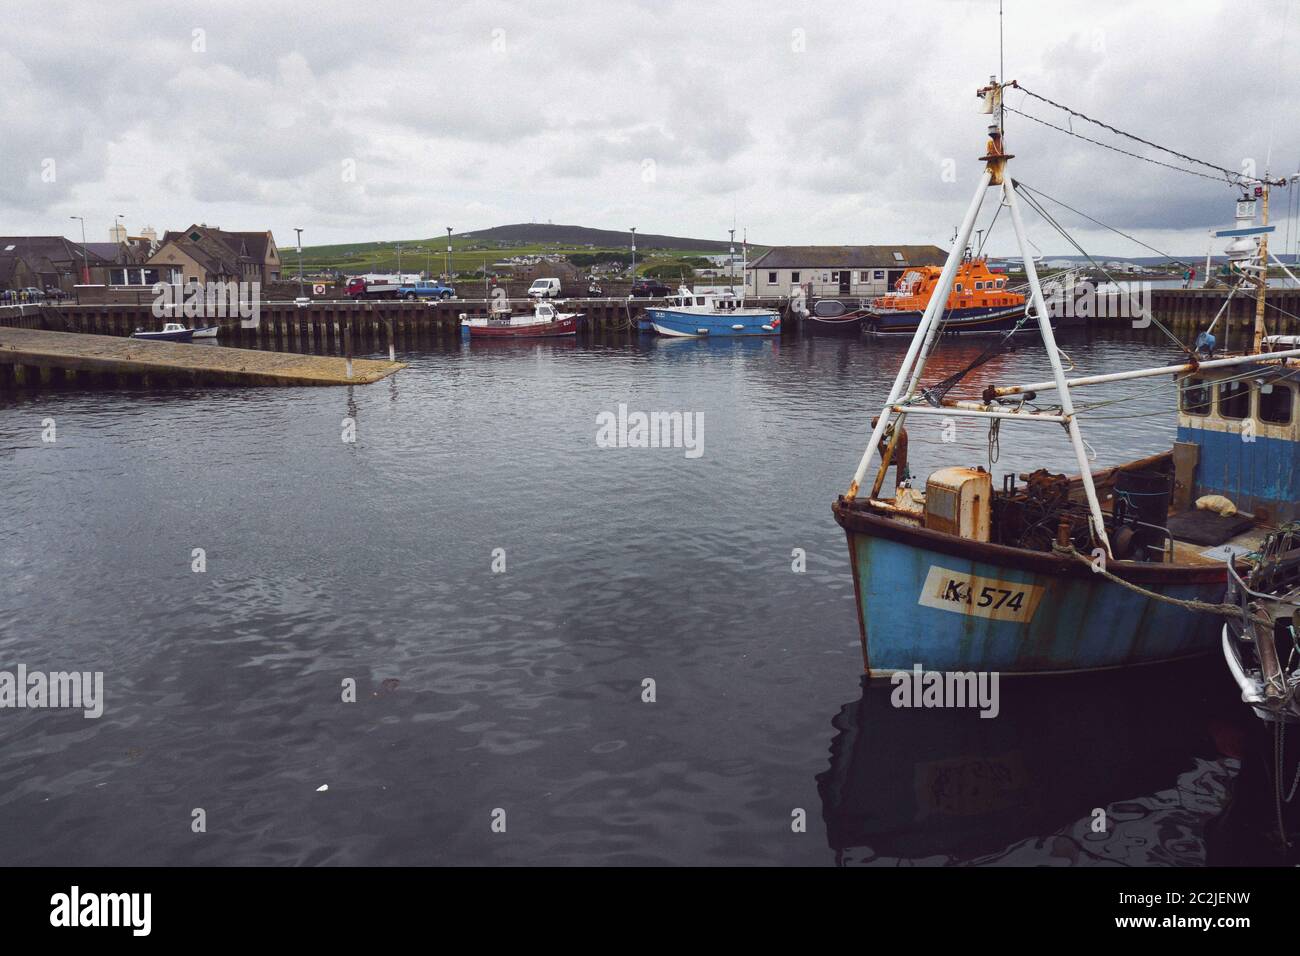 Boats on water, Orkney Islands Scotland. Stock Photo